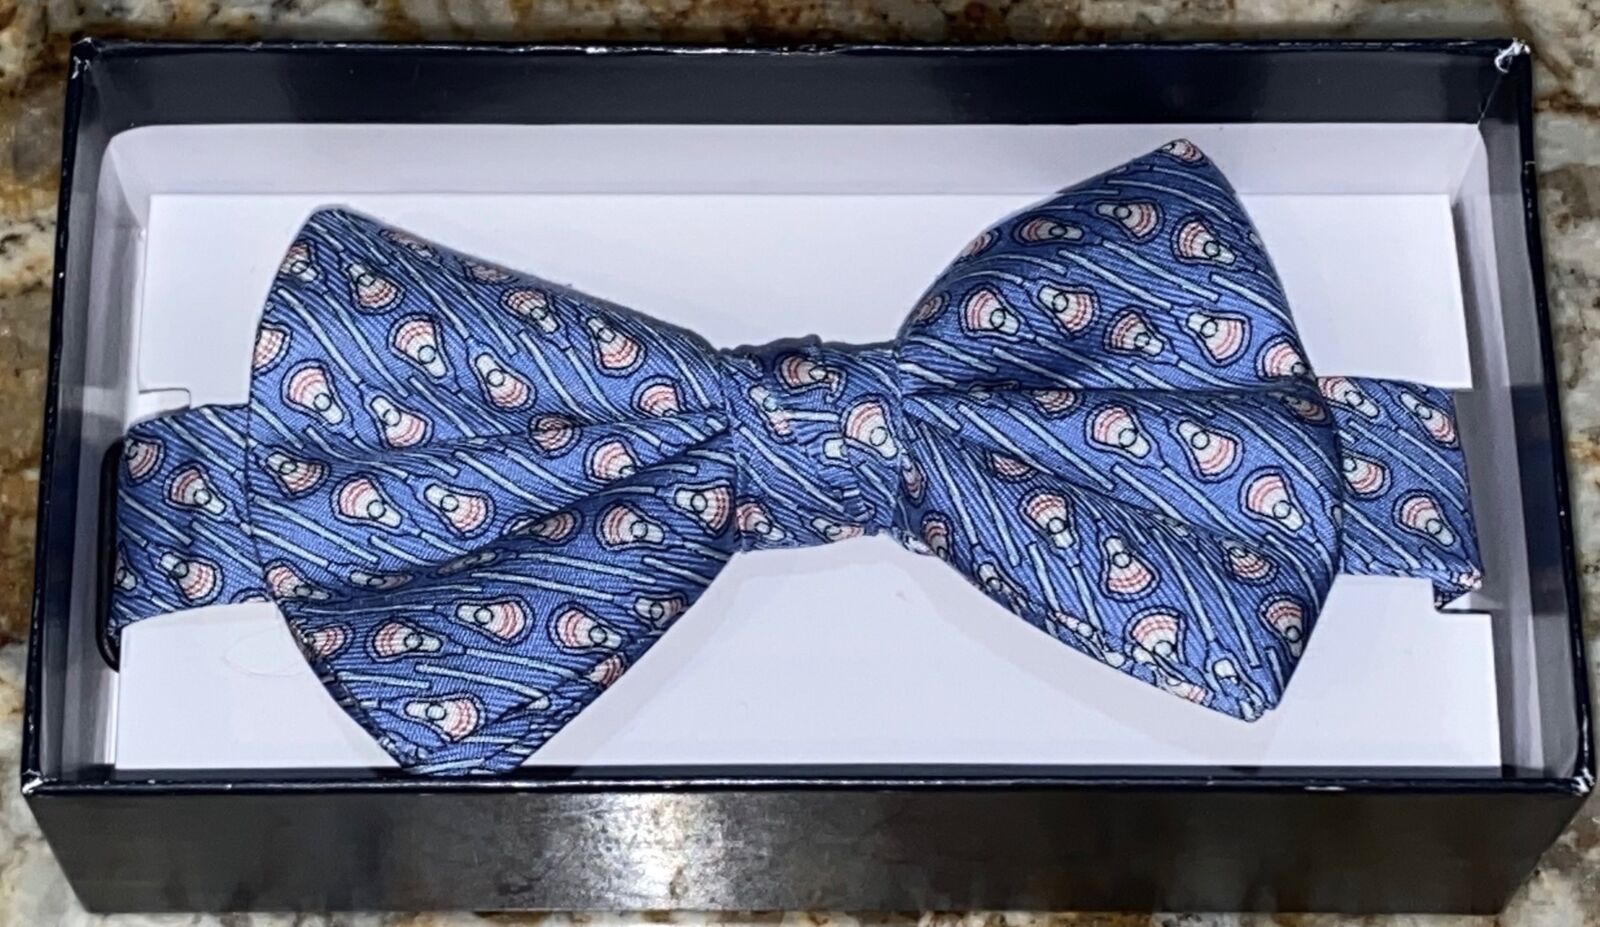 VINEYARD VINES Lacrosse Sticks Blue White New Shipping Free Shipping B Red Tie Max 53% OFF Silk NEW Bow